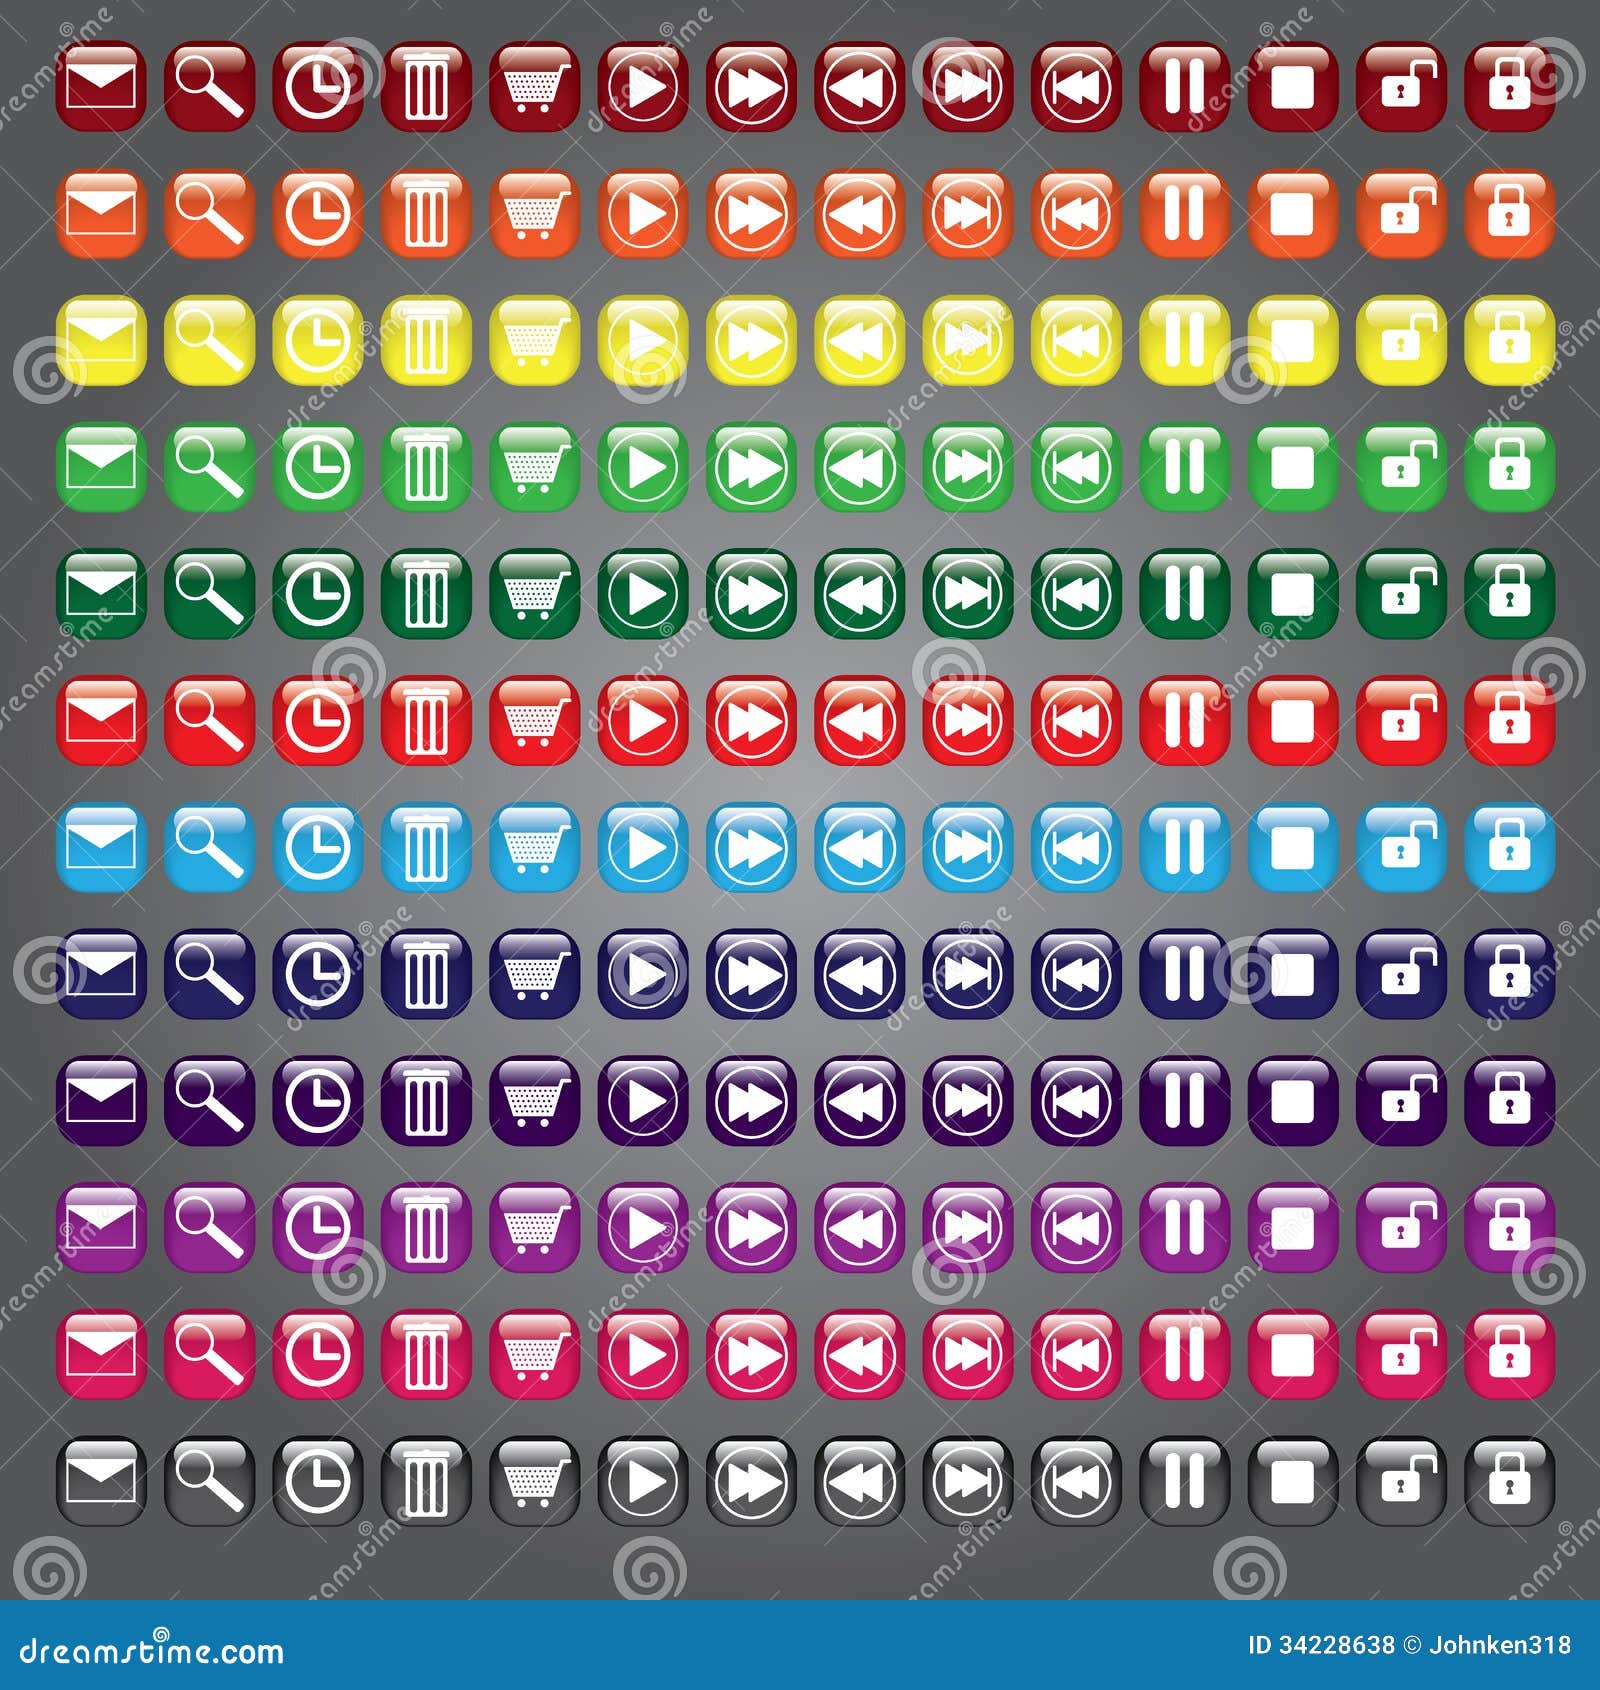 web icons buttons collection royalty free stock photos